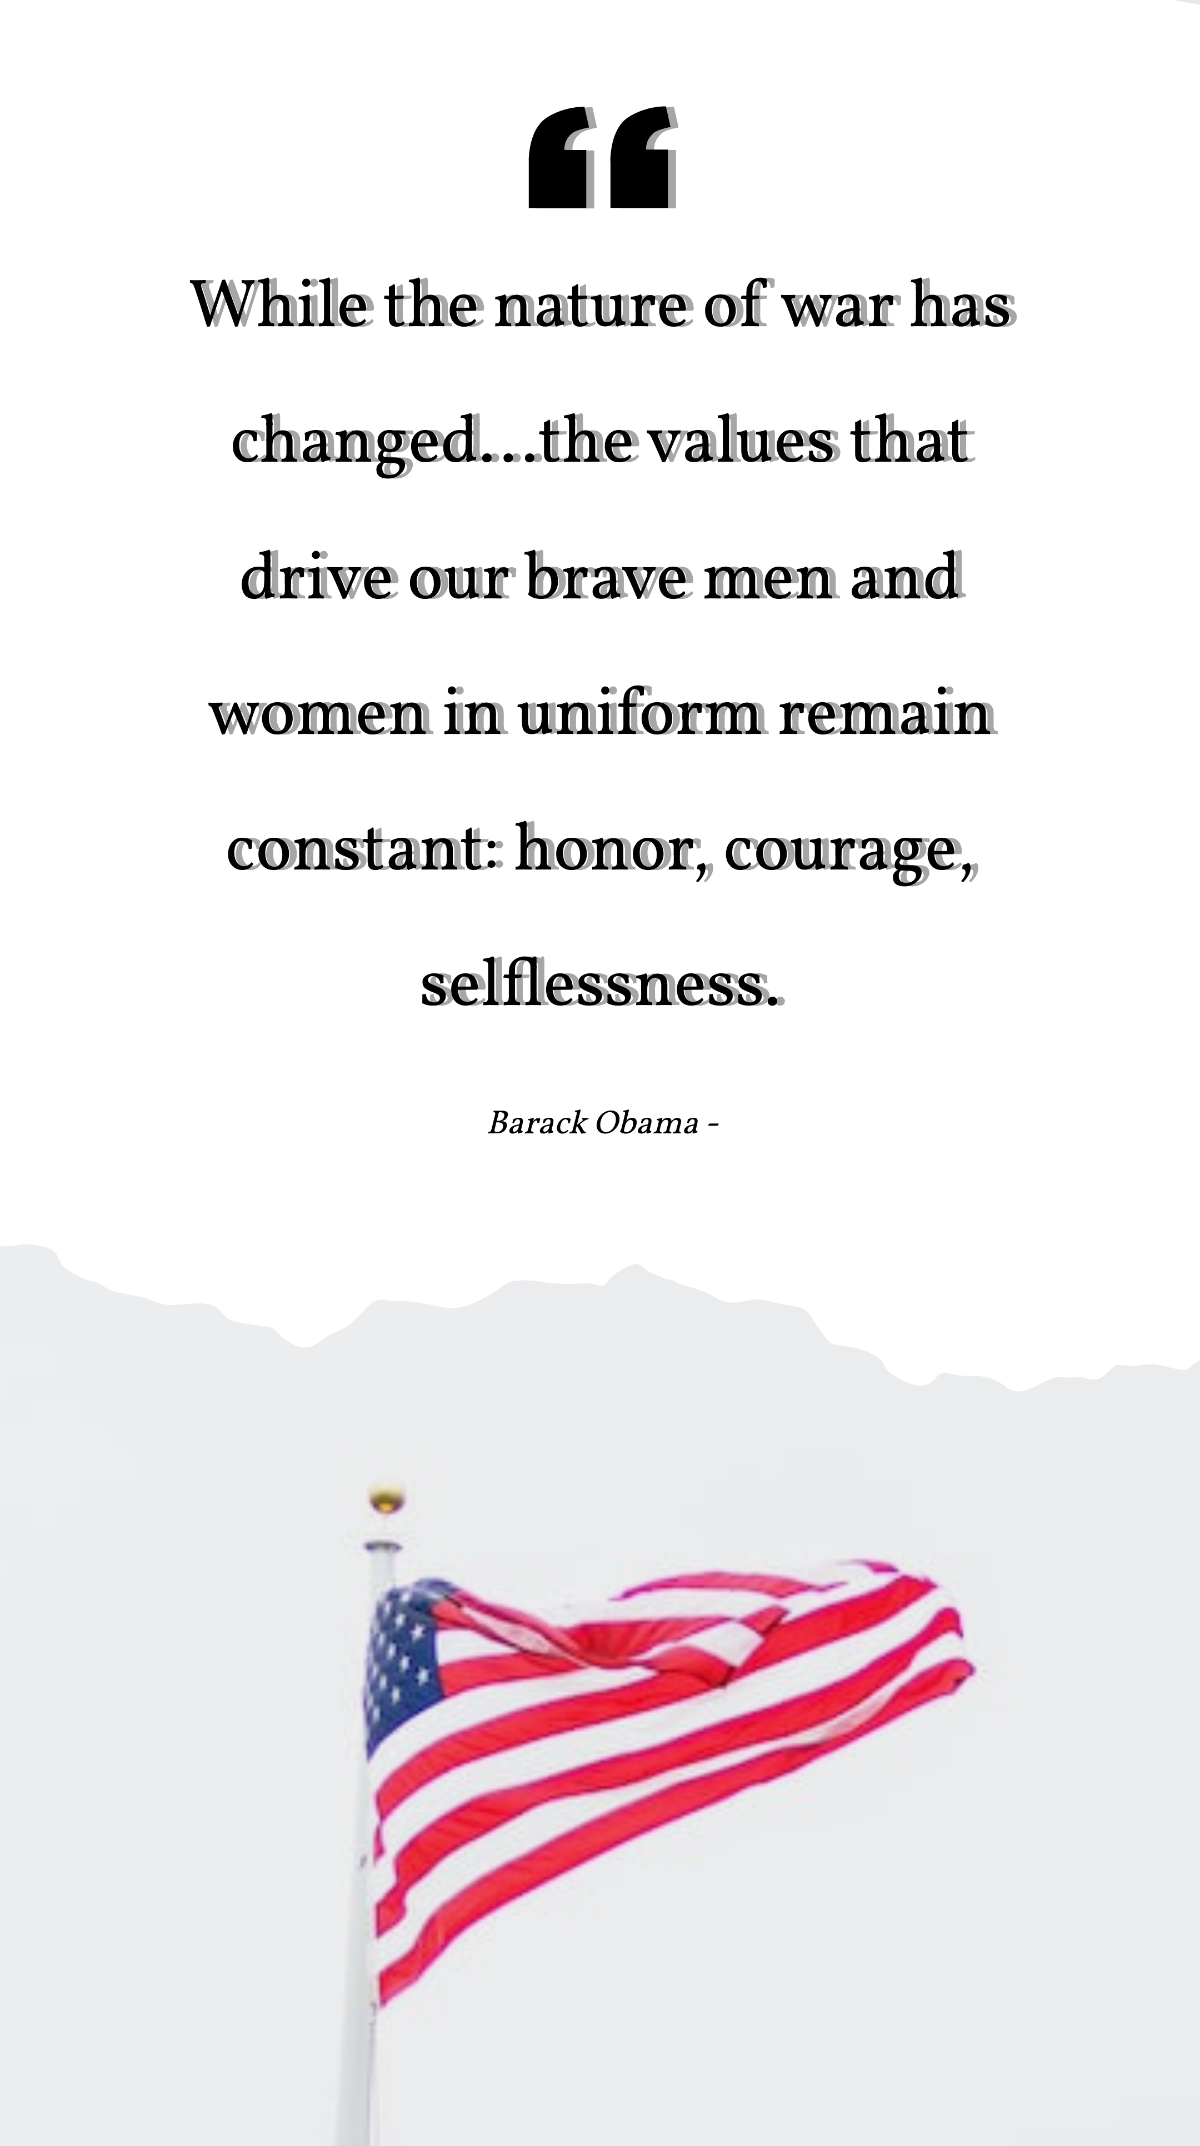 Barack Obama - While the nature of war has changed...the values that drive our brave men and women in uniform remain constant: honor, courage, selflessness. Template